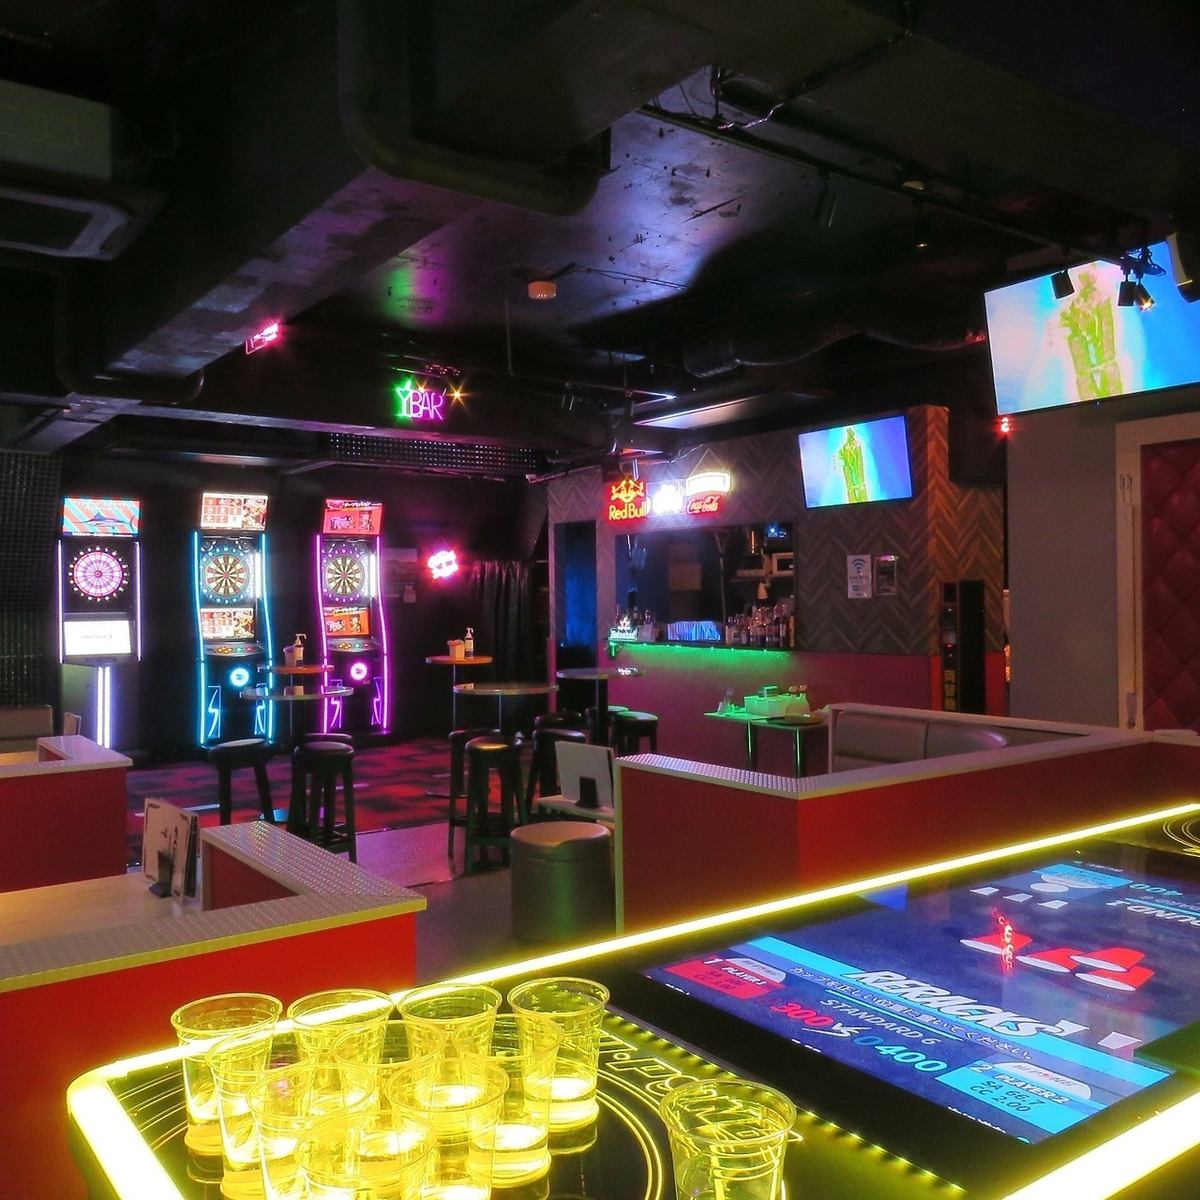 We also have a powerful darts machine and beer pong that is sure to get the crowd excited.